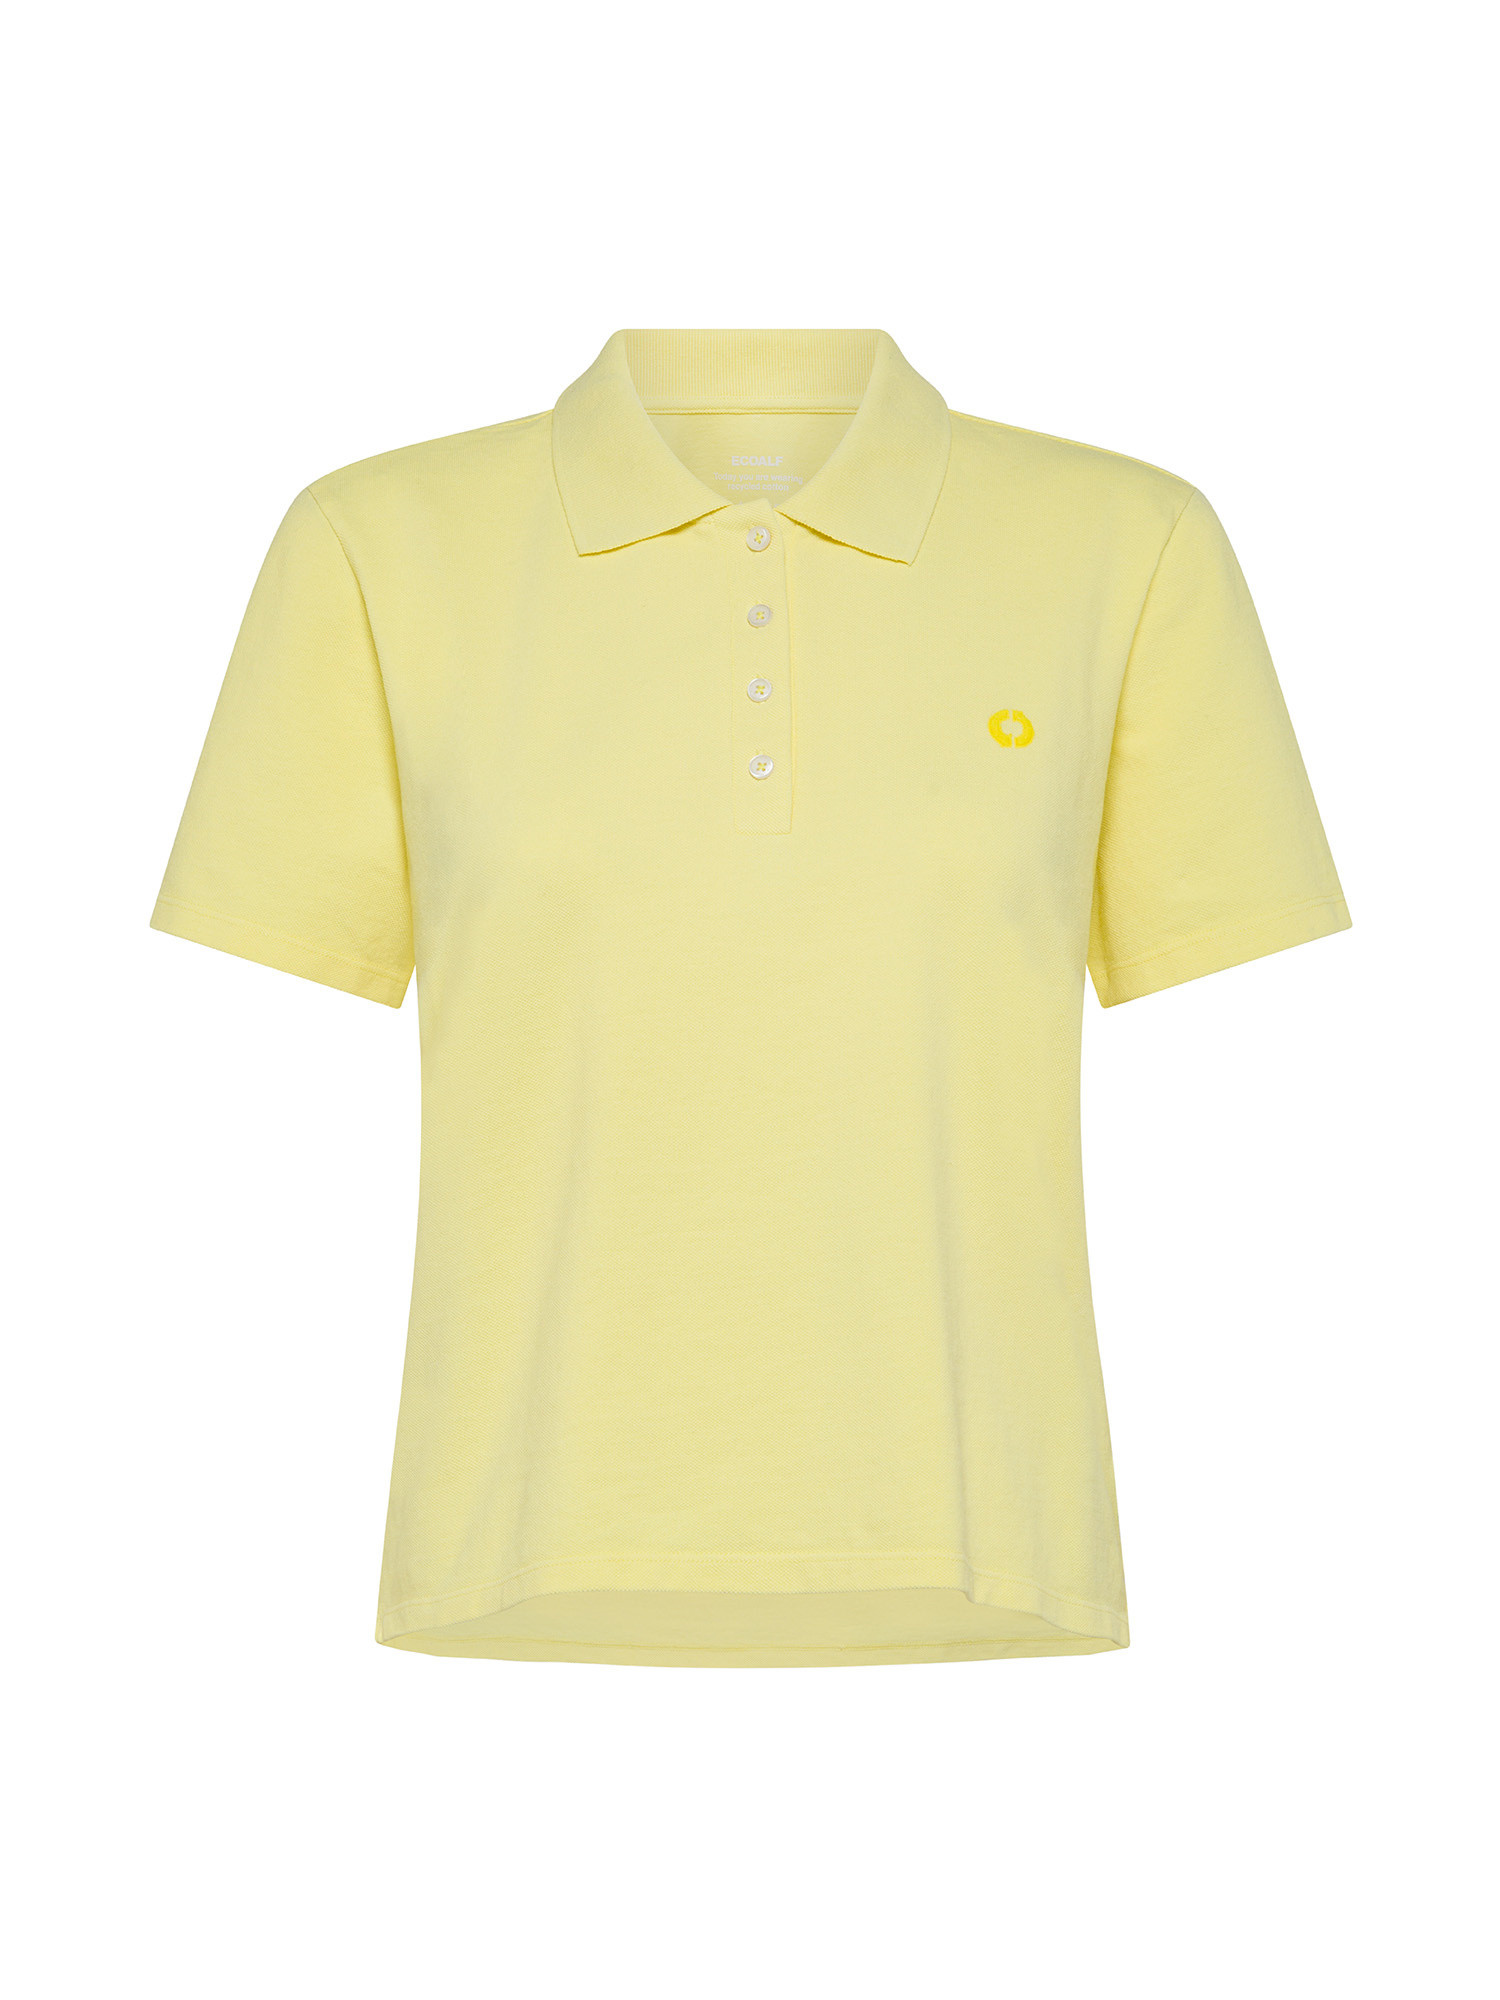 Ecoalf - Ancona T-shirt with embroidered logo, Yellow, large image number 0